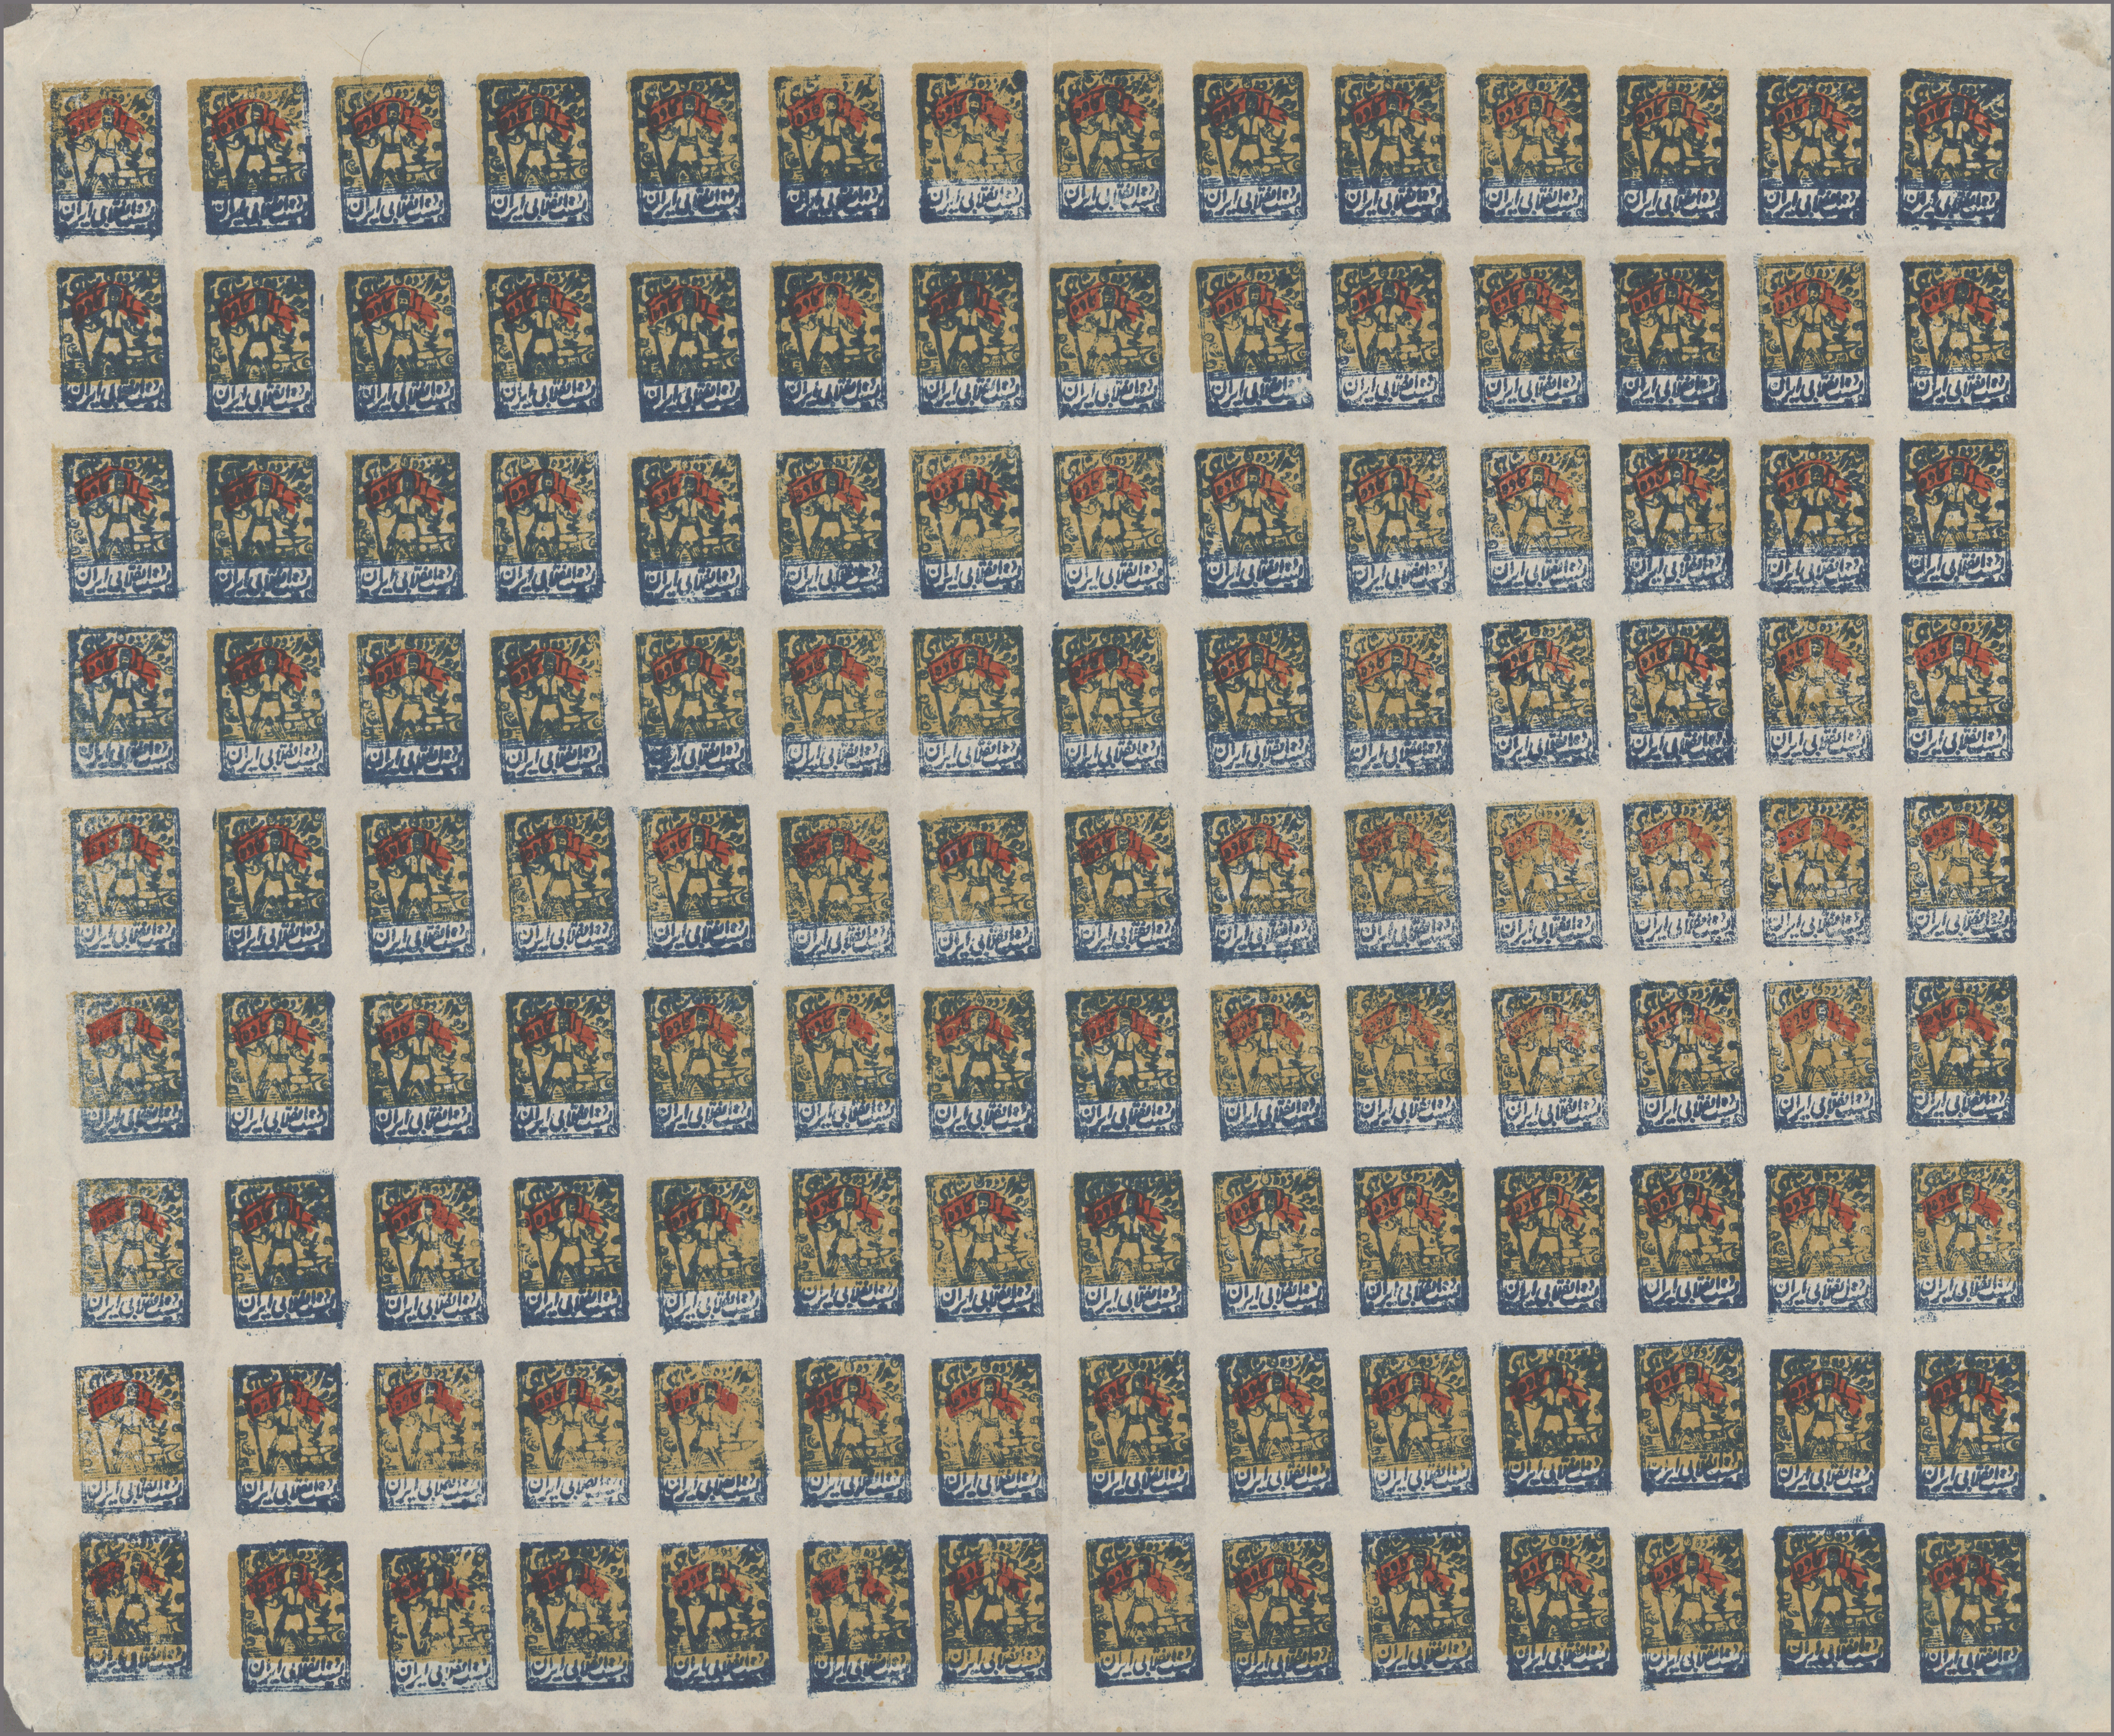 Lot 02240 - iran  -  Auktionshaus Christoph Gärtner GmbH & Co. KG 55th AUCTION - Day 2